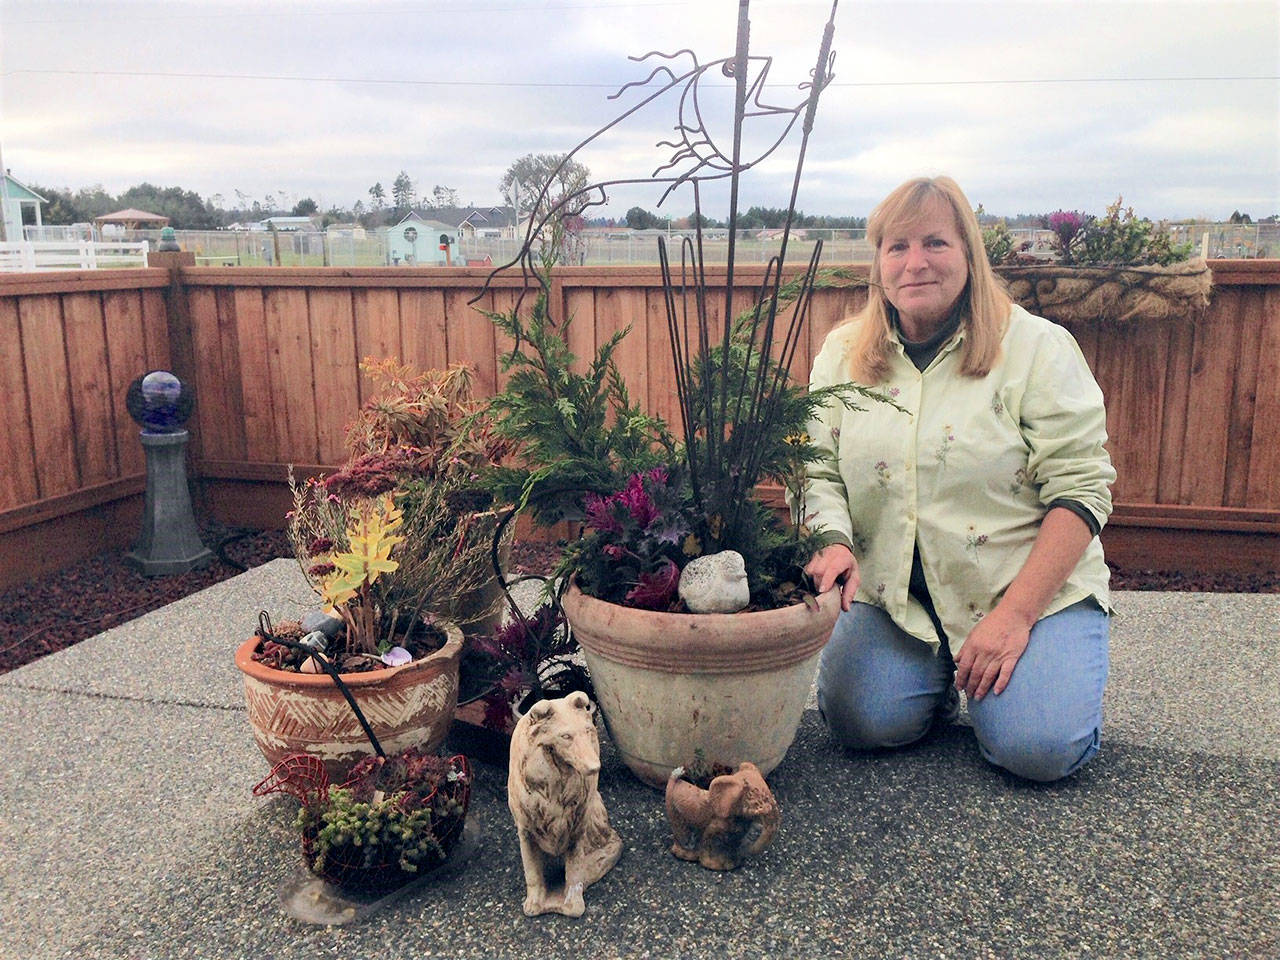 Susan Kalmar, a Clallam County Master Gardener, will discuss simple drip irrigation systems in her Zoom presentation today, Thursday, June 25. (Photo courtesy of Susan Kalmar)